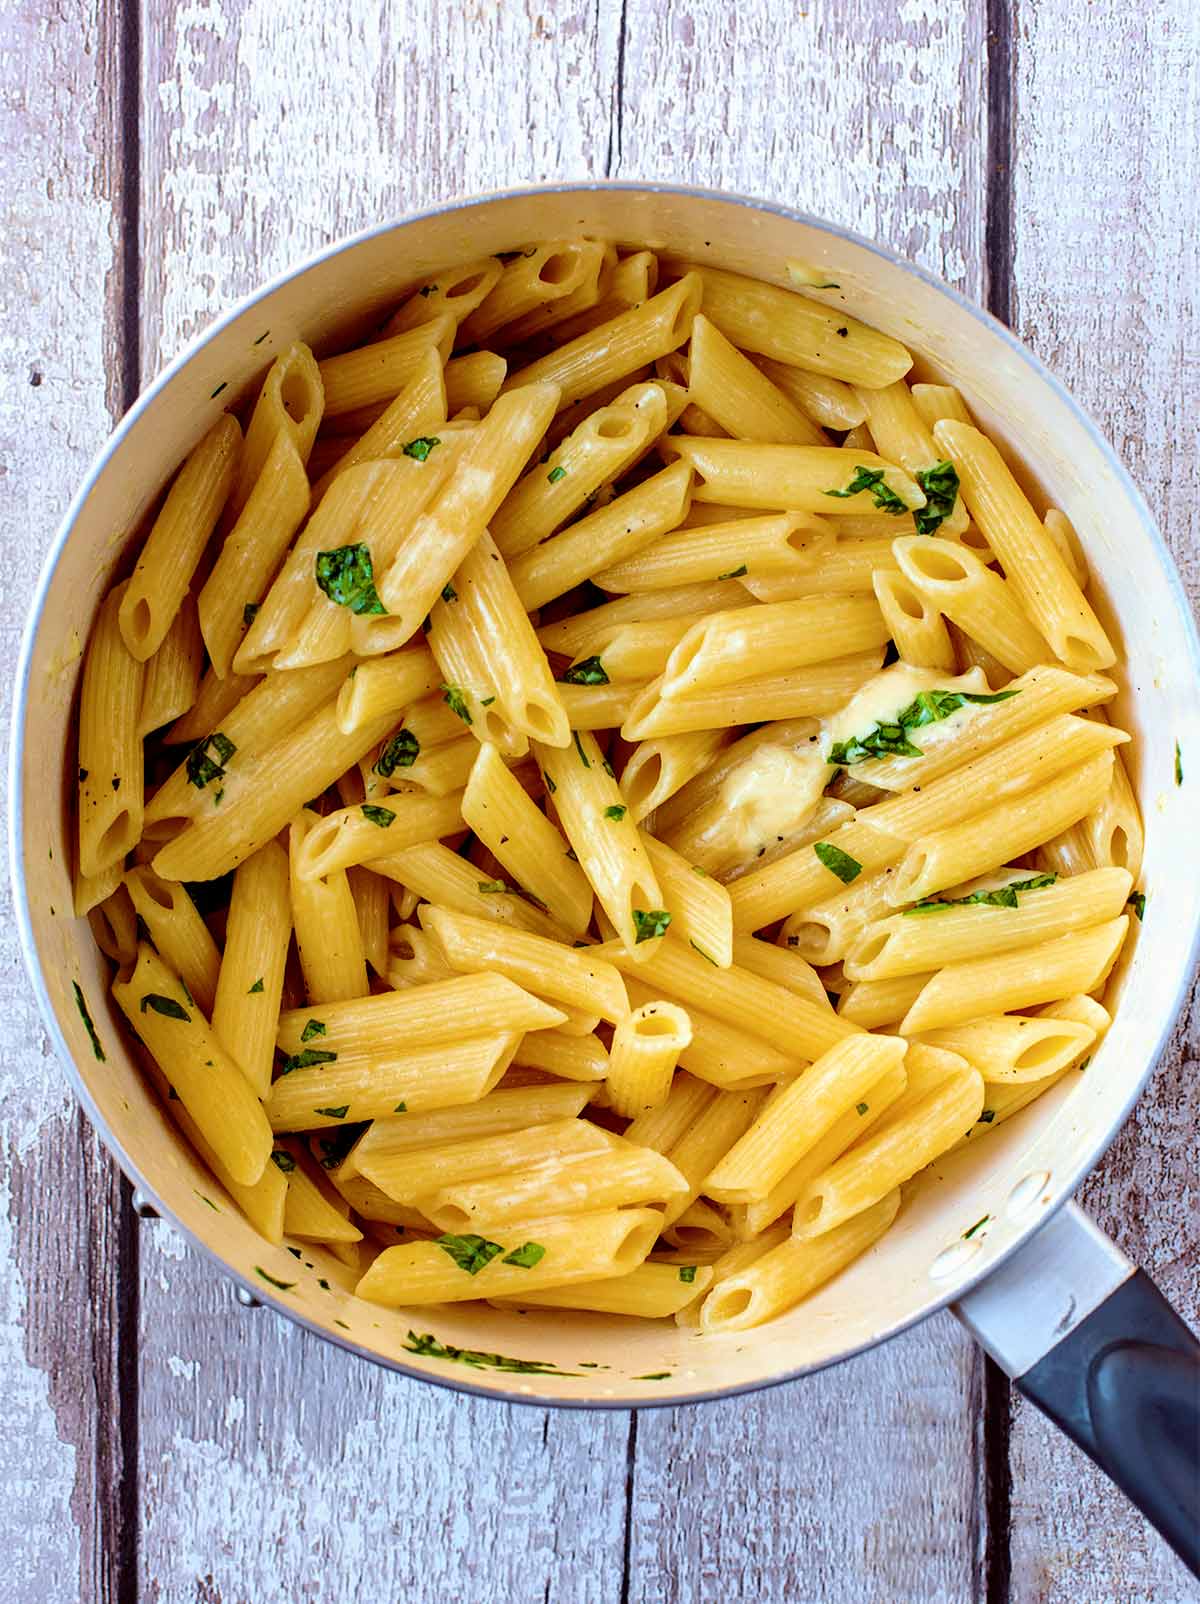 A saucepan full of cooked penne pasta in a cream cheese sauce.